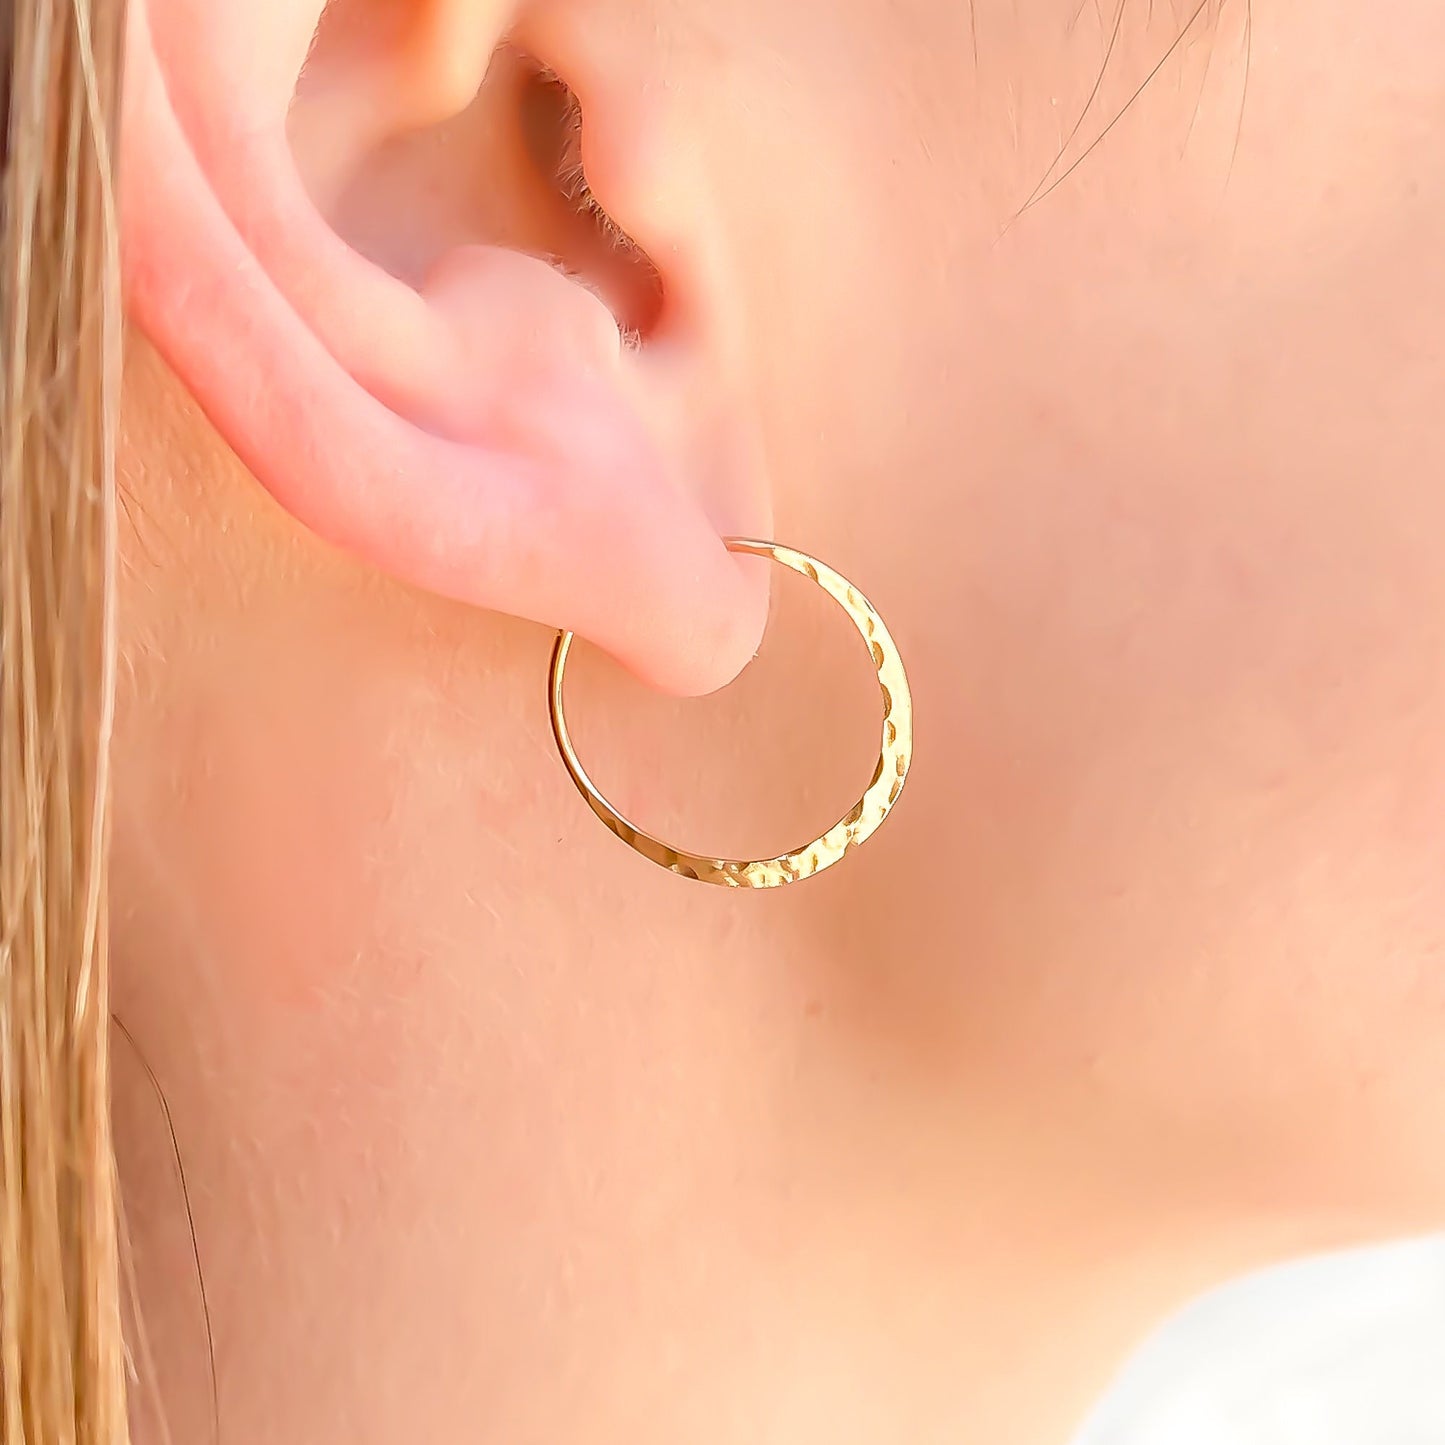 20mm Small Hammered Earrings, 14K Gold Filled